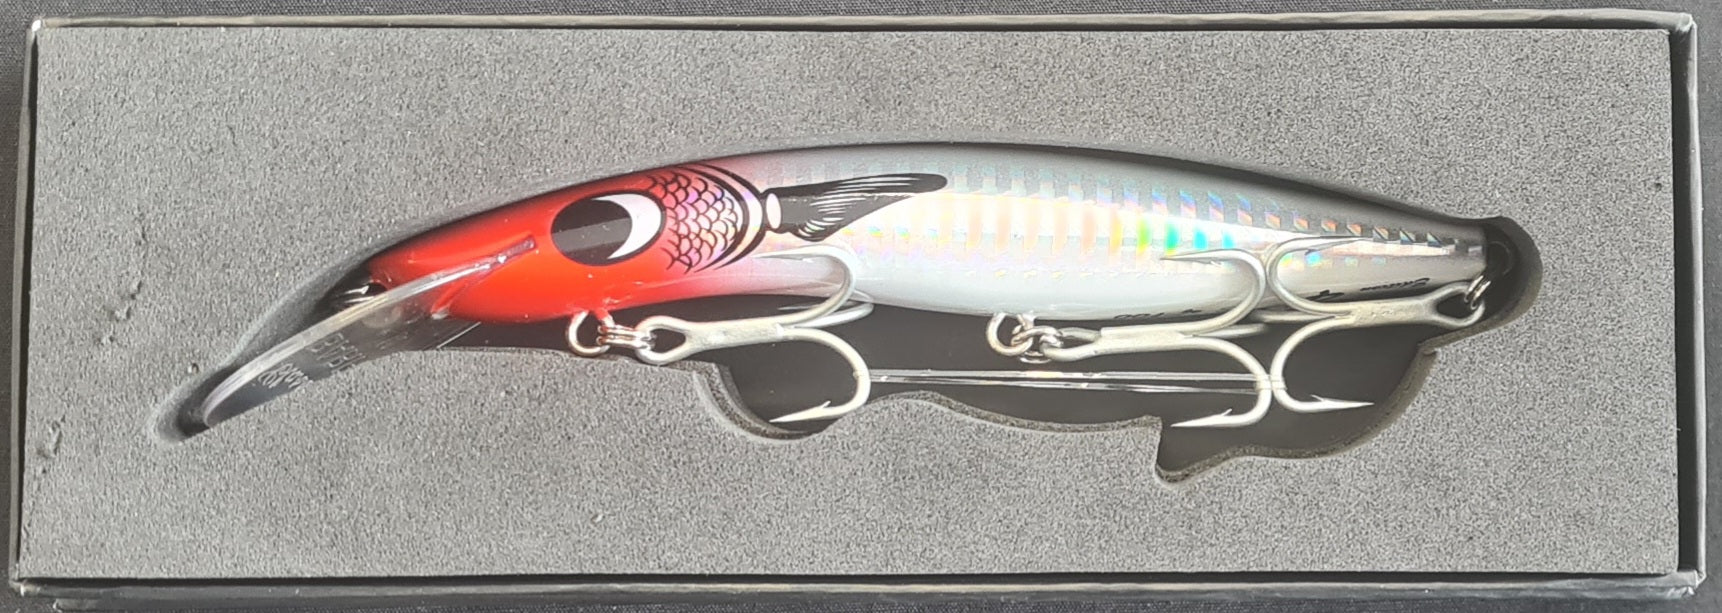 Classic Lures Limited Edition Box Set – REEL 'N' DEAL TACKLE